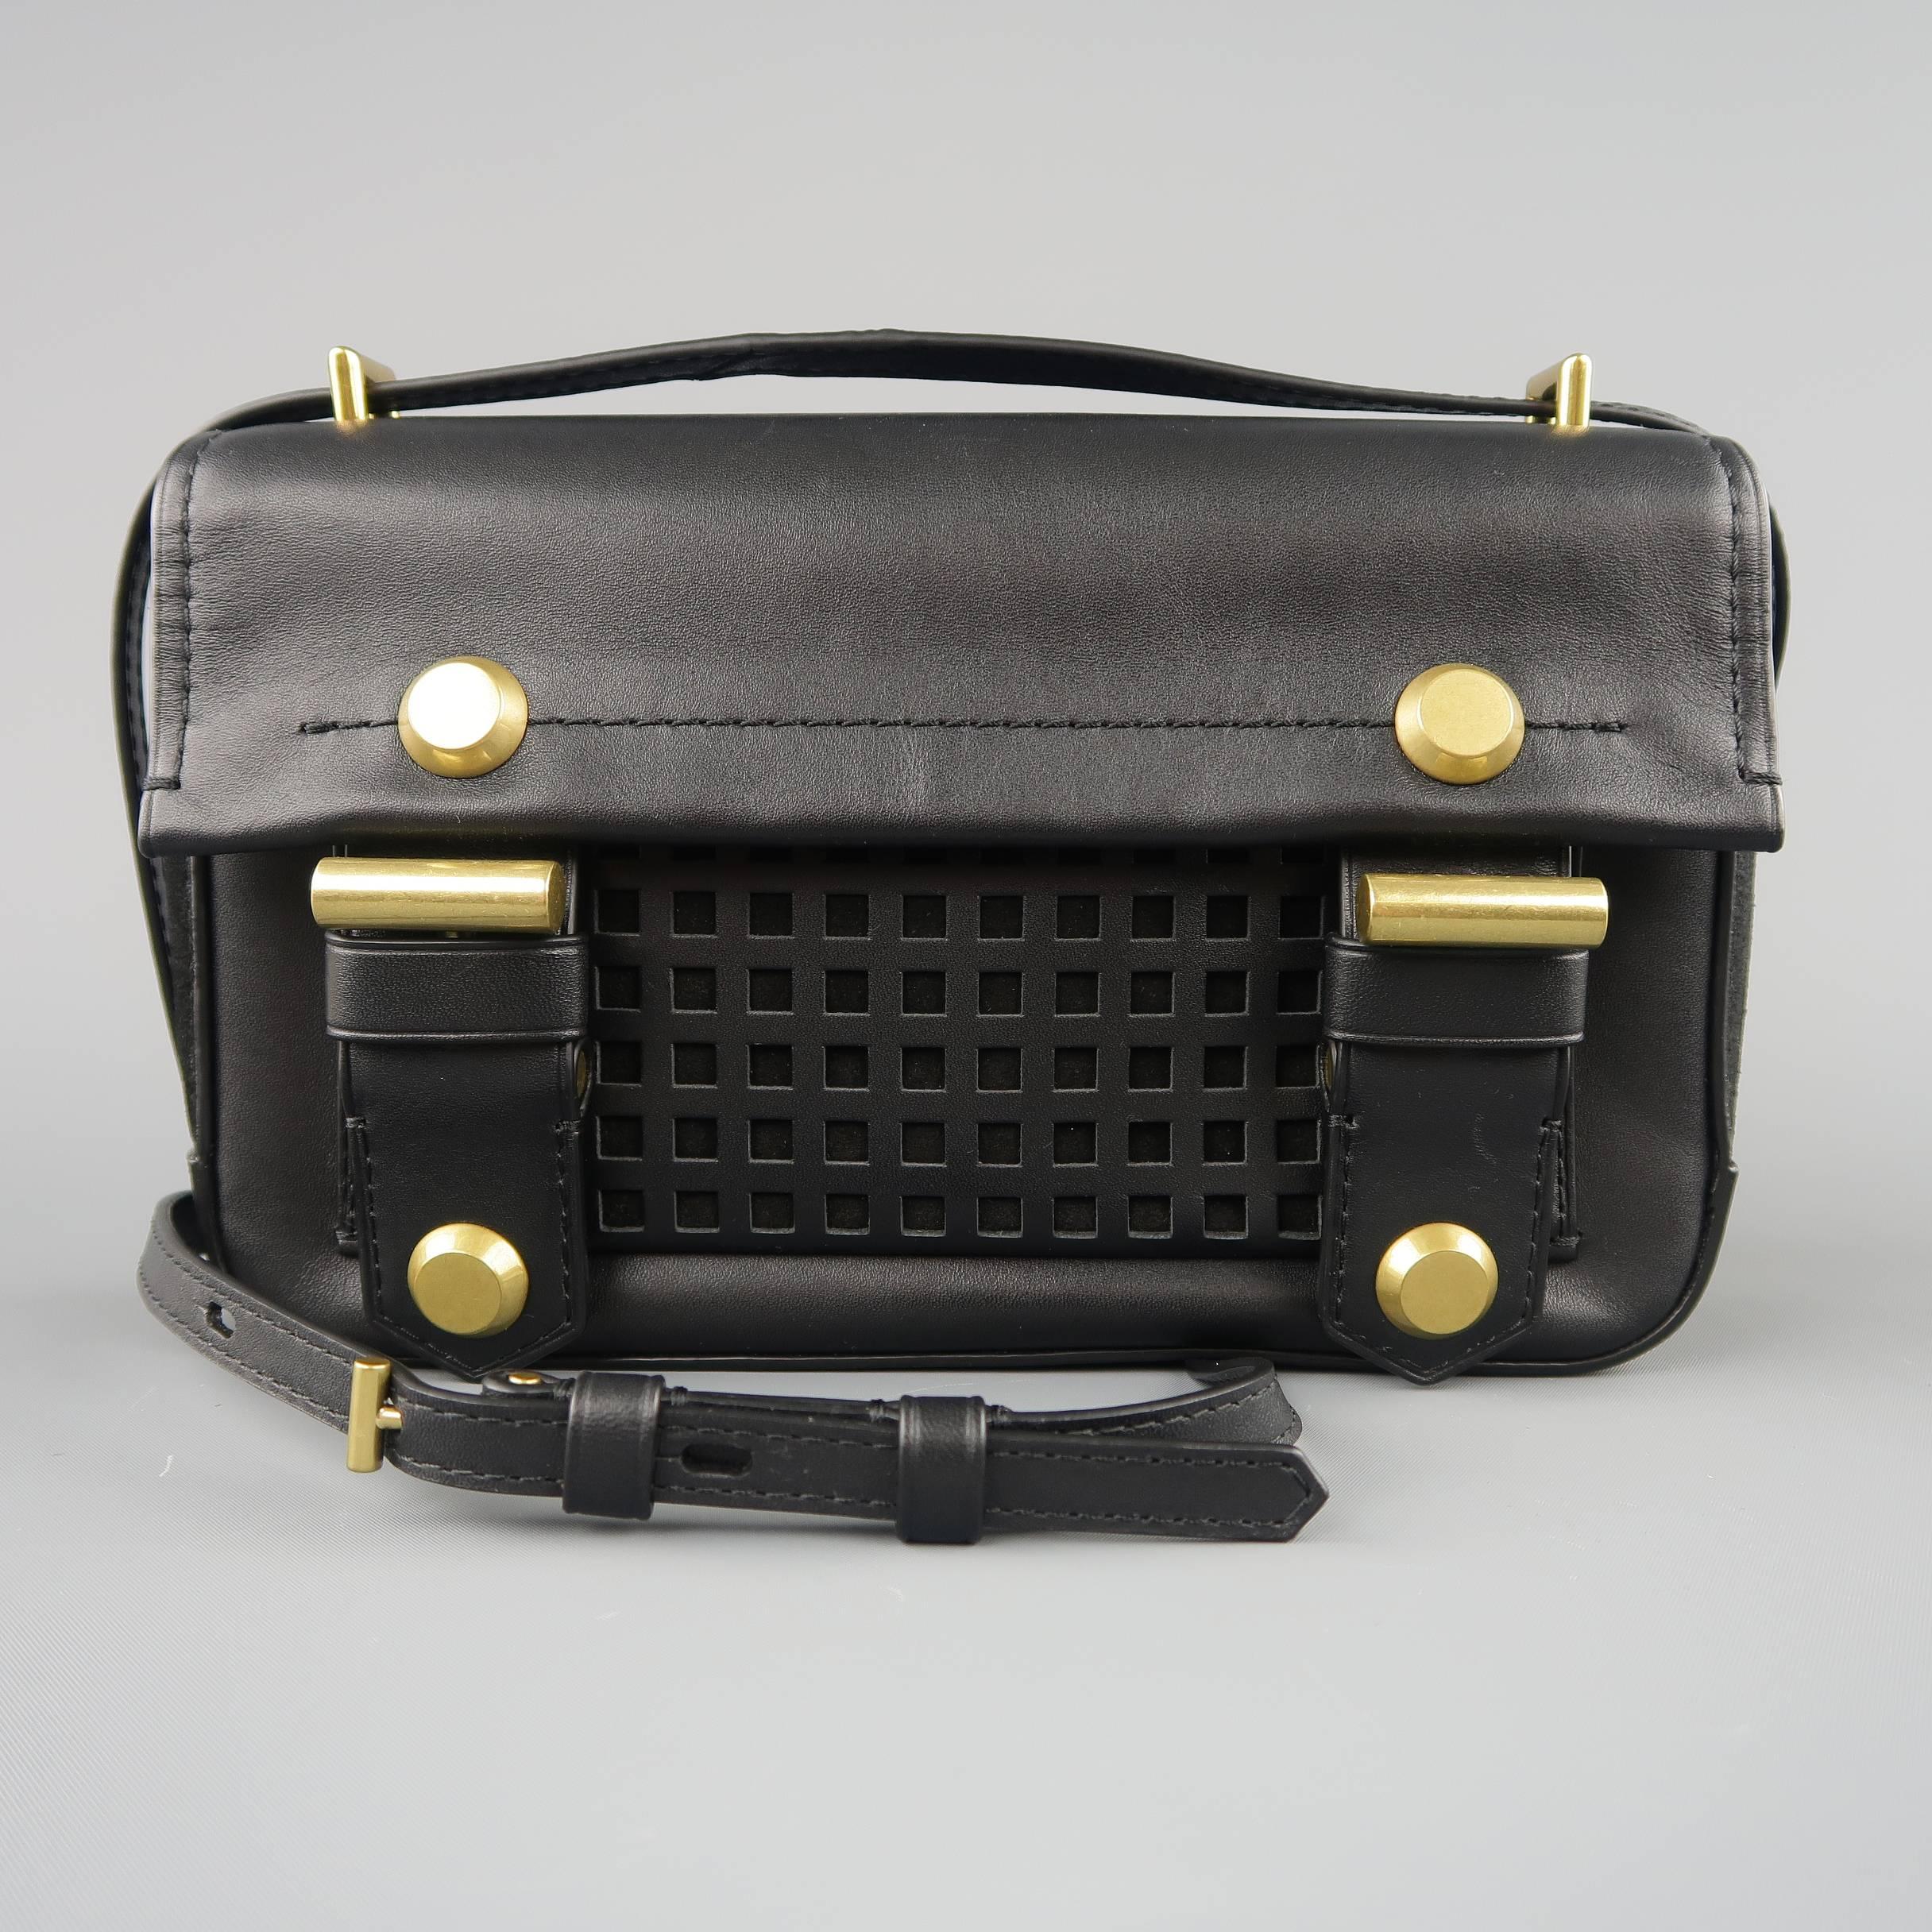 REED KRAKOFF satchel bag comes in smooth black leather with suede sides, flap closure with double snap tabs, gold tone brass stud hardware, and grid perforated pockets.
 
Brand New.
 
Measurements:
 
Length: 9.5 in.
Width: 2 in.
Height: 6 in.
Drop: